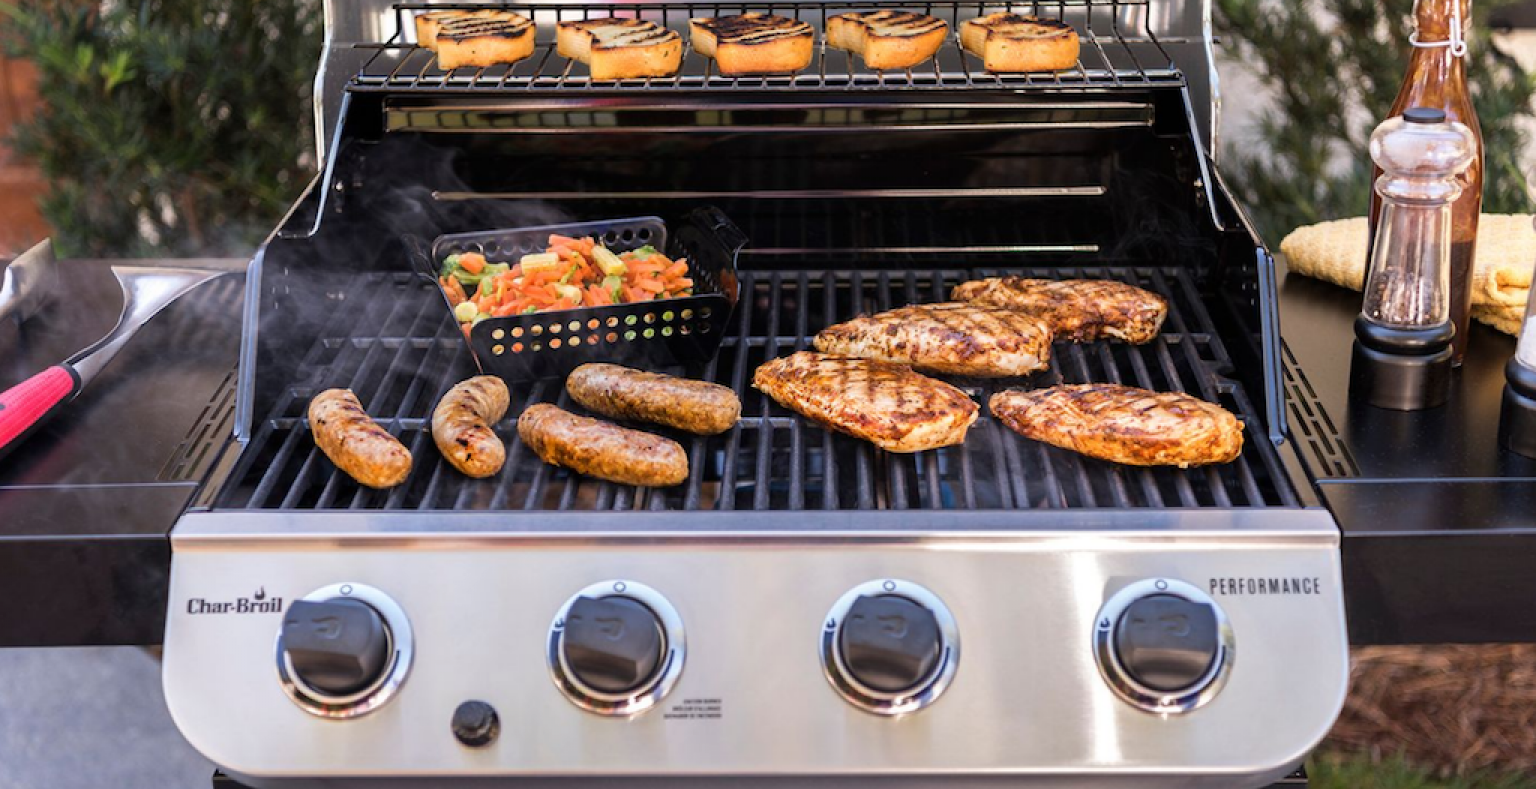 10 Best Propane Grills In 2022 (Unbiased Reviews & Buying Guide)